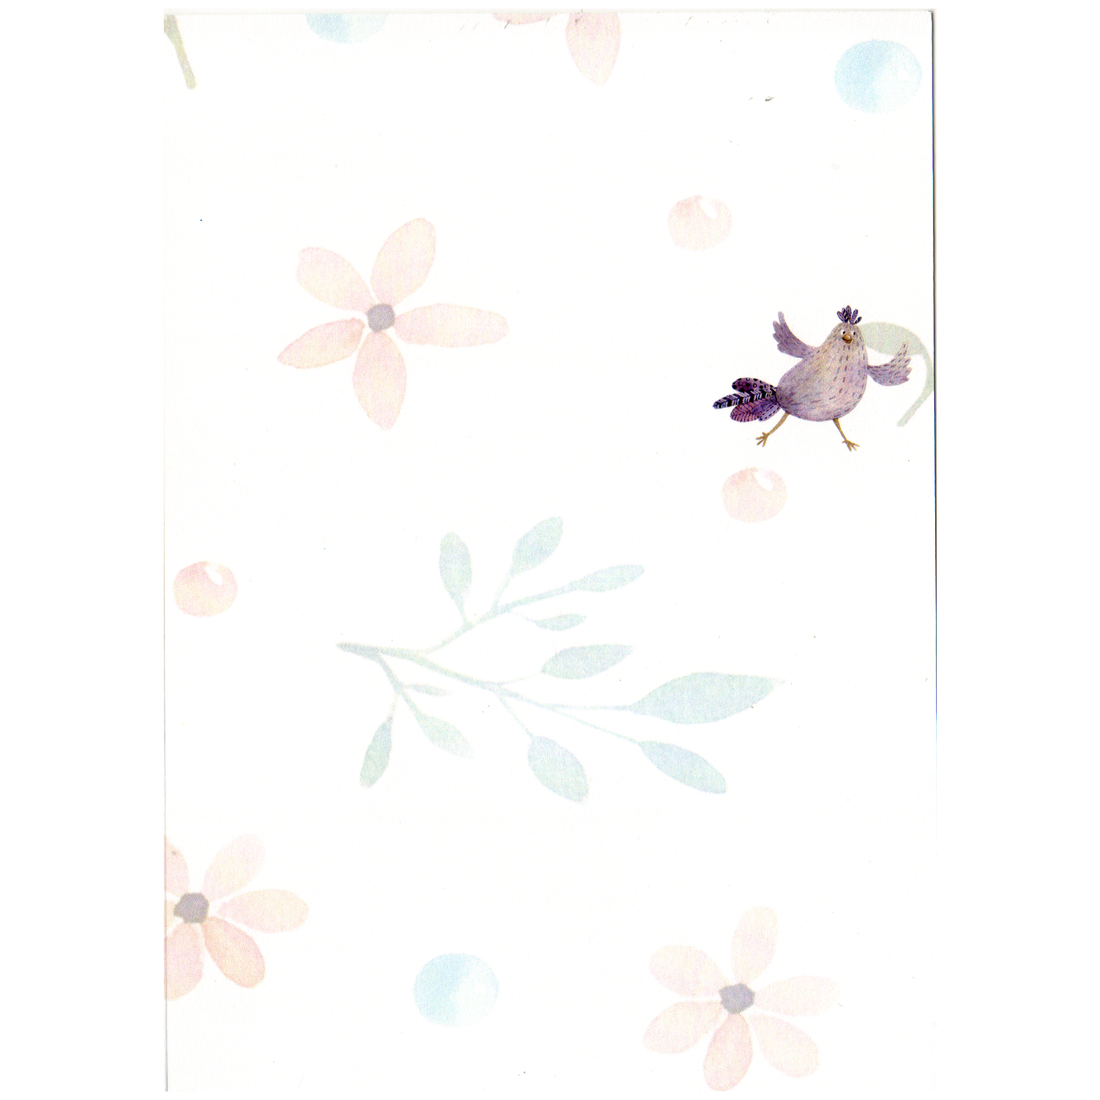 A paler version of the flowered pattern off the front of the card is featured on the inside along with a cute bird to the right